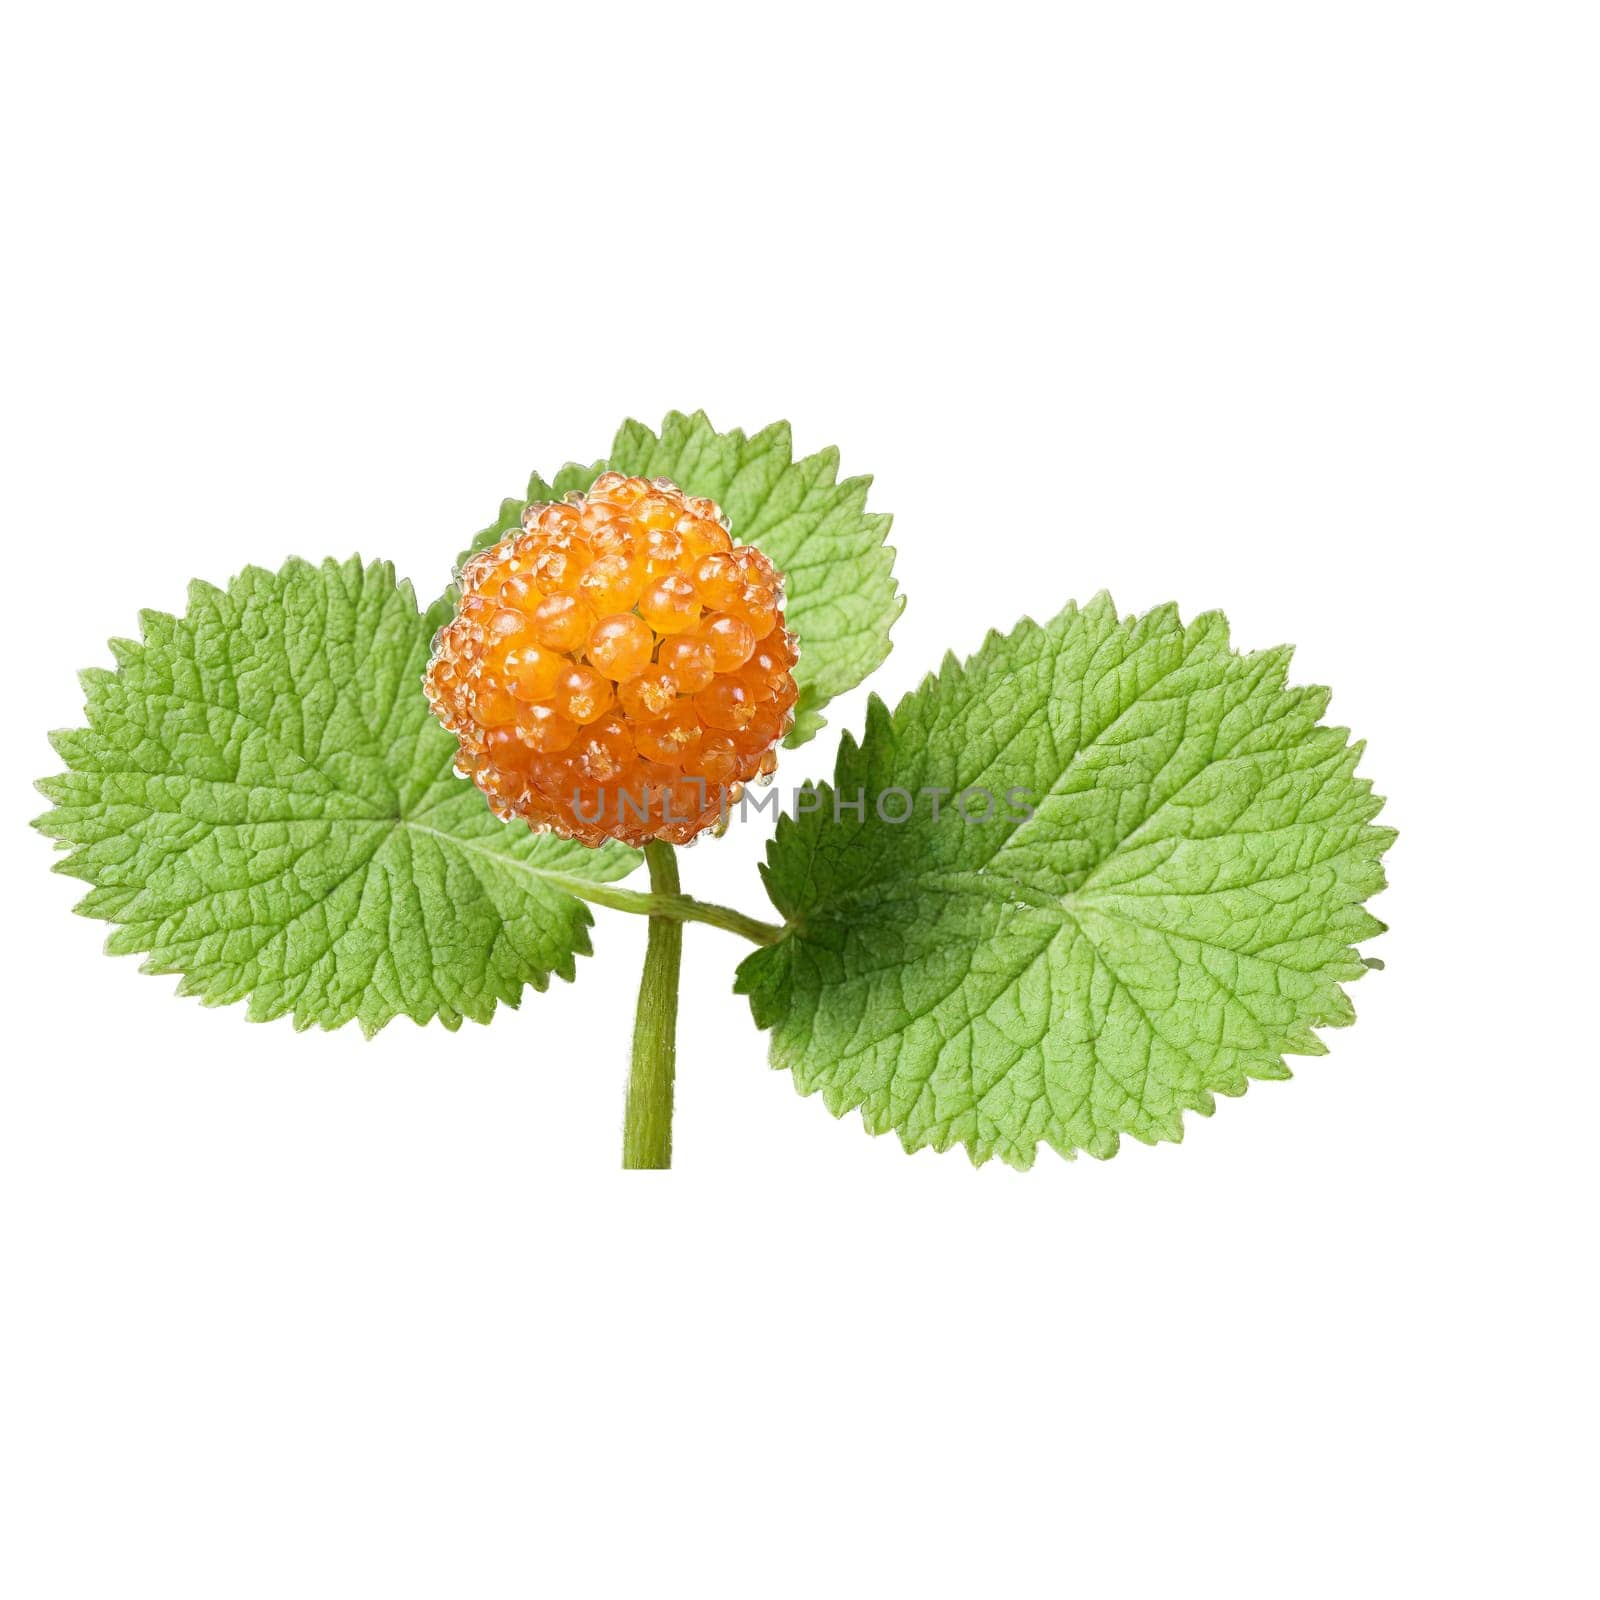 Cloudberry Bush low growing shrub with lobed leaves and large amber colored fruits Rubus chamaemorus. Plants isolated on transparent background.